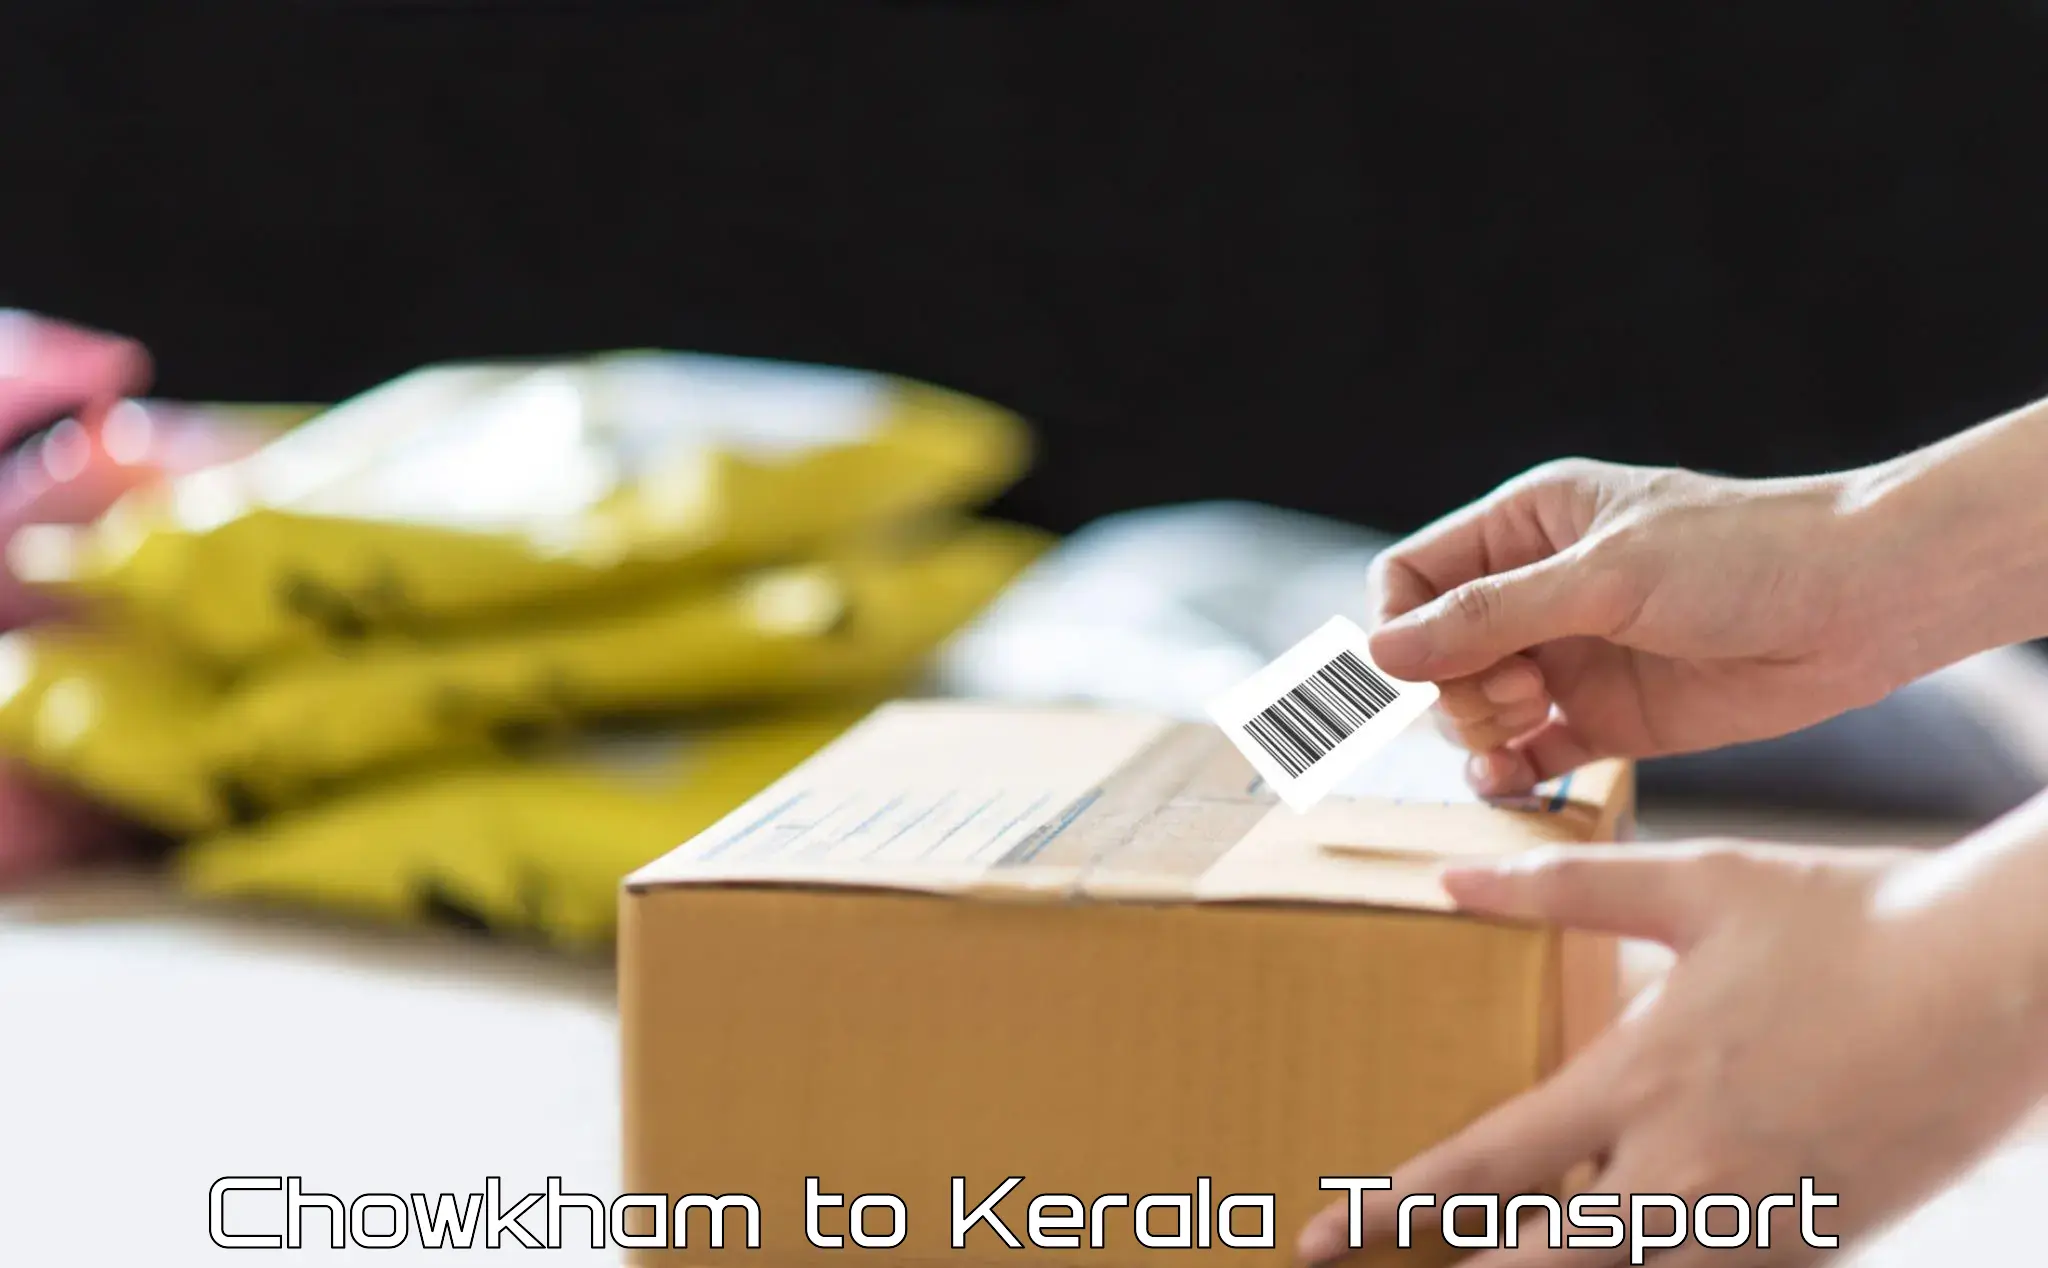 Air cargo transport services Chowkham to Kerala